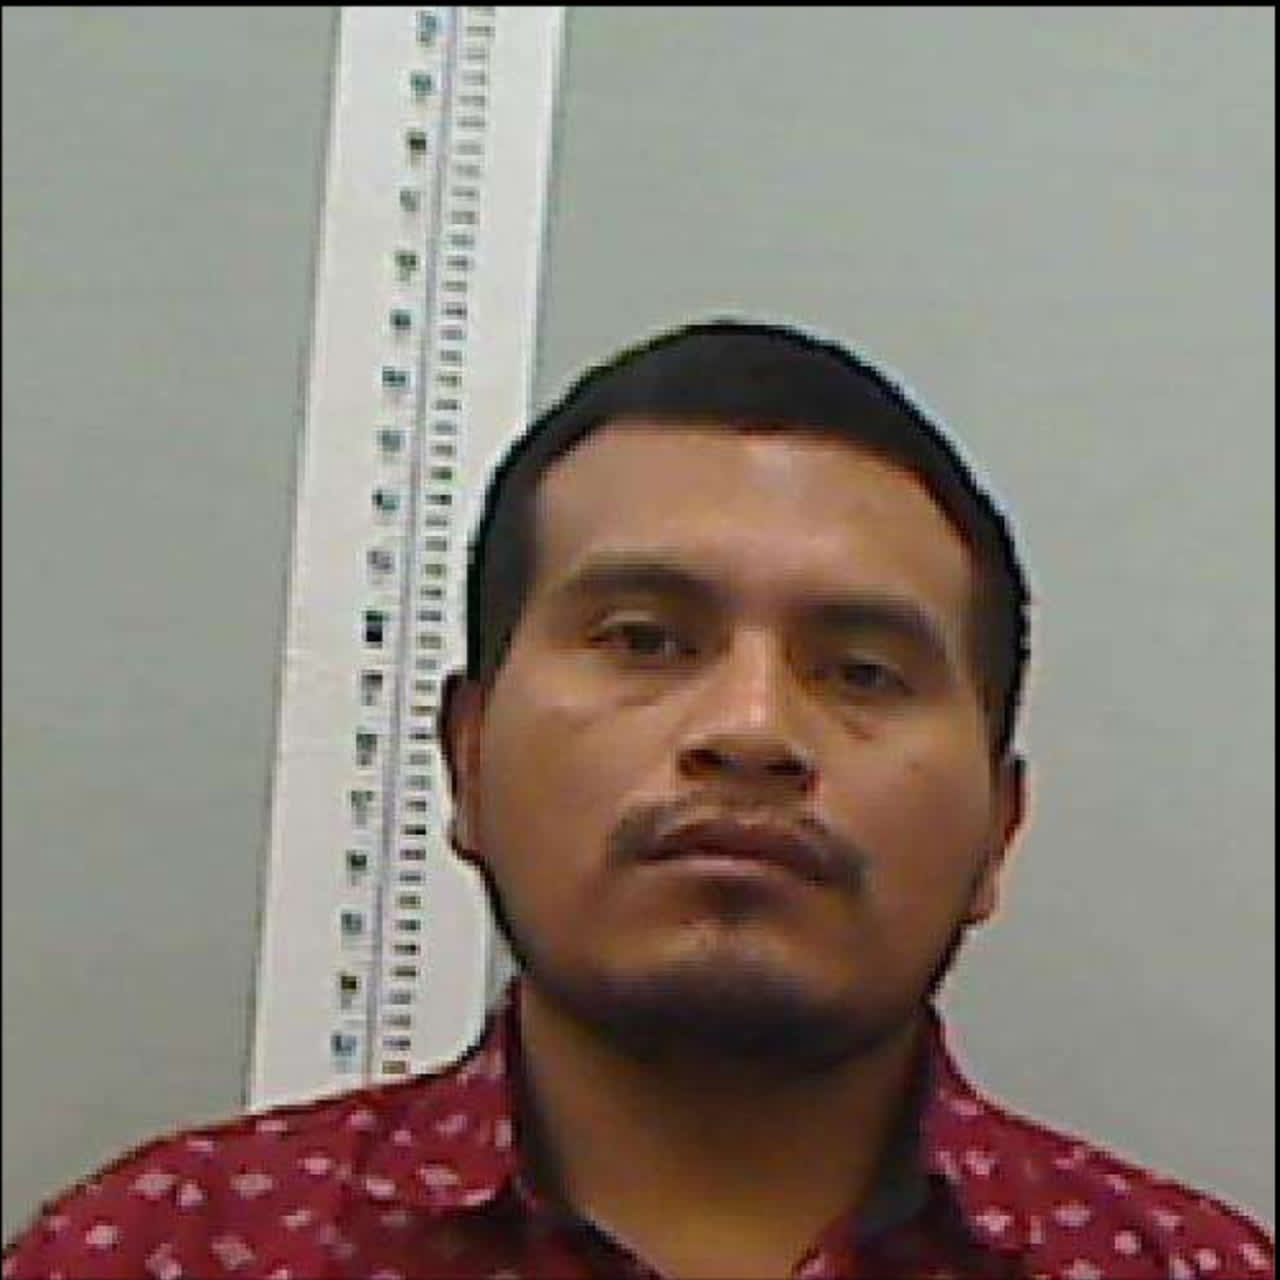 The preliminary investigation indicates the man's name may be Reyno Vasquez Ramirez and that he is originally from Guatemala.